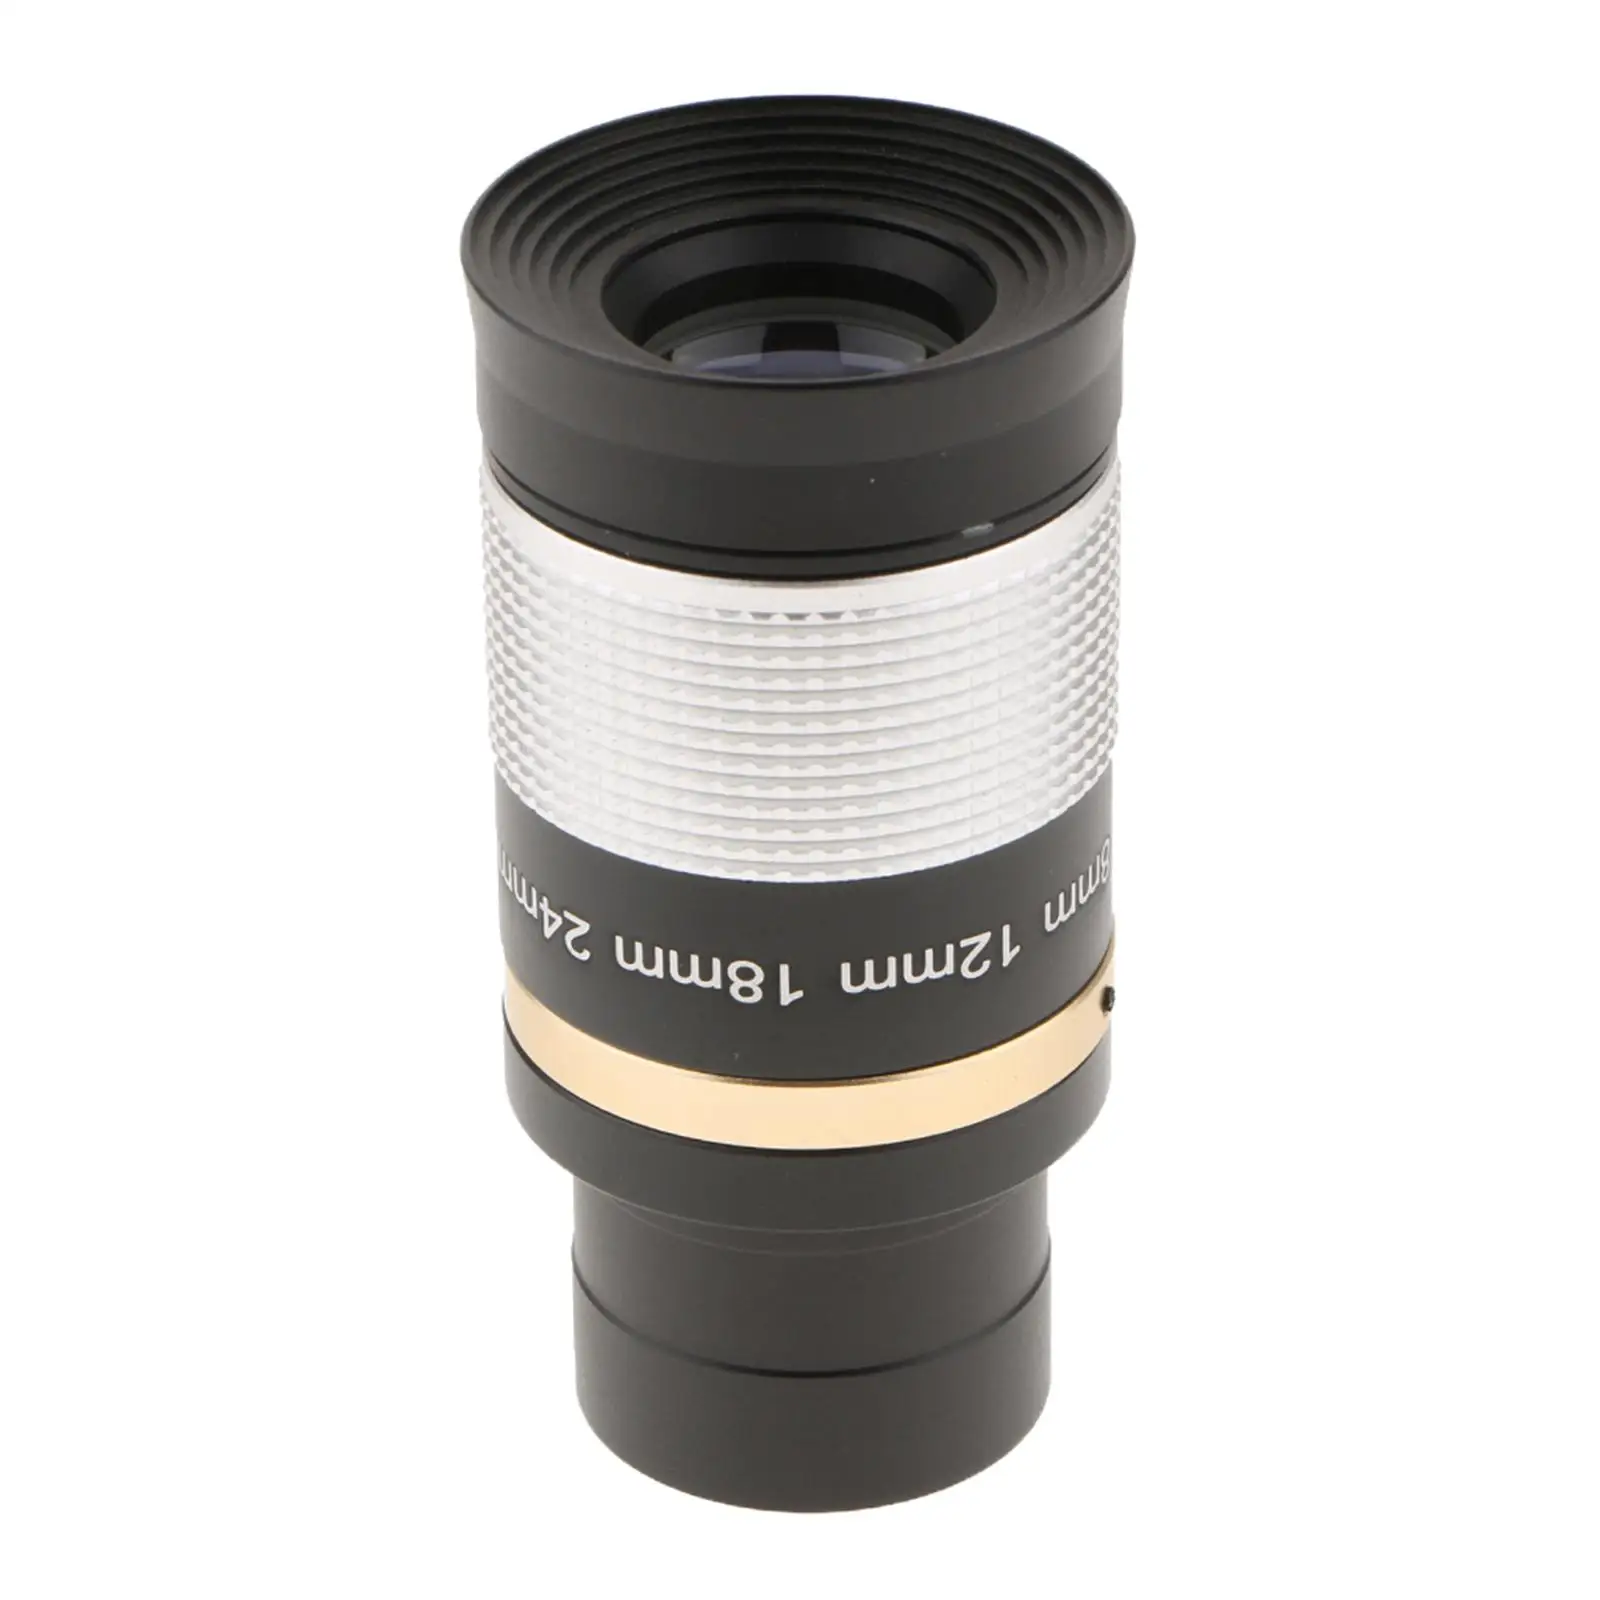 Metal 8-24mm Eyepiece 1.25 inch Multi Coated Optic Lens for Telescope